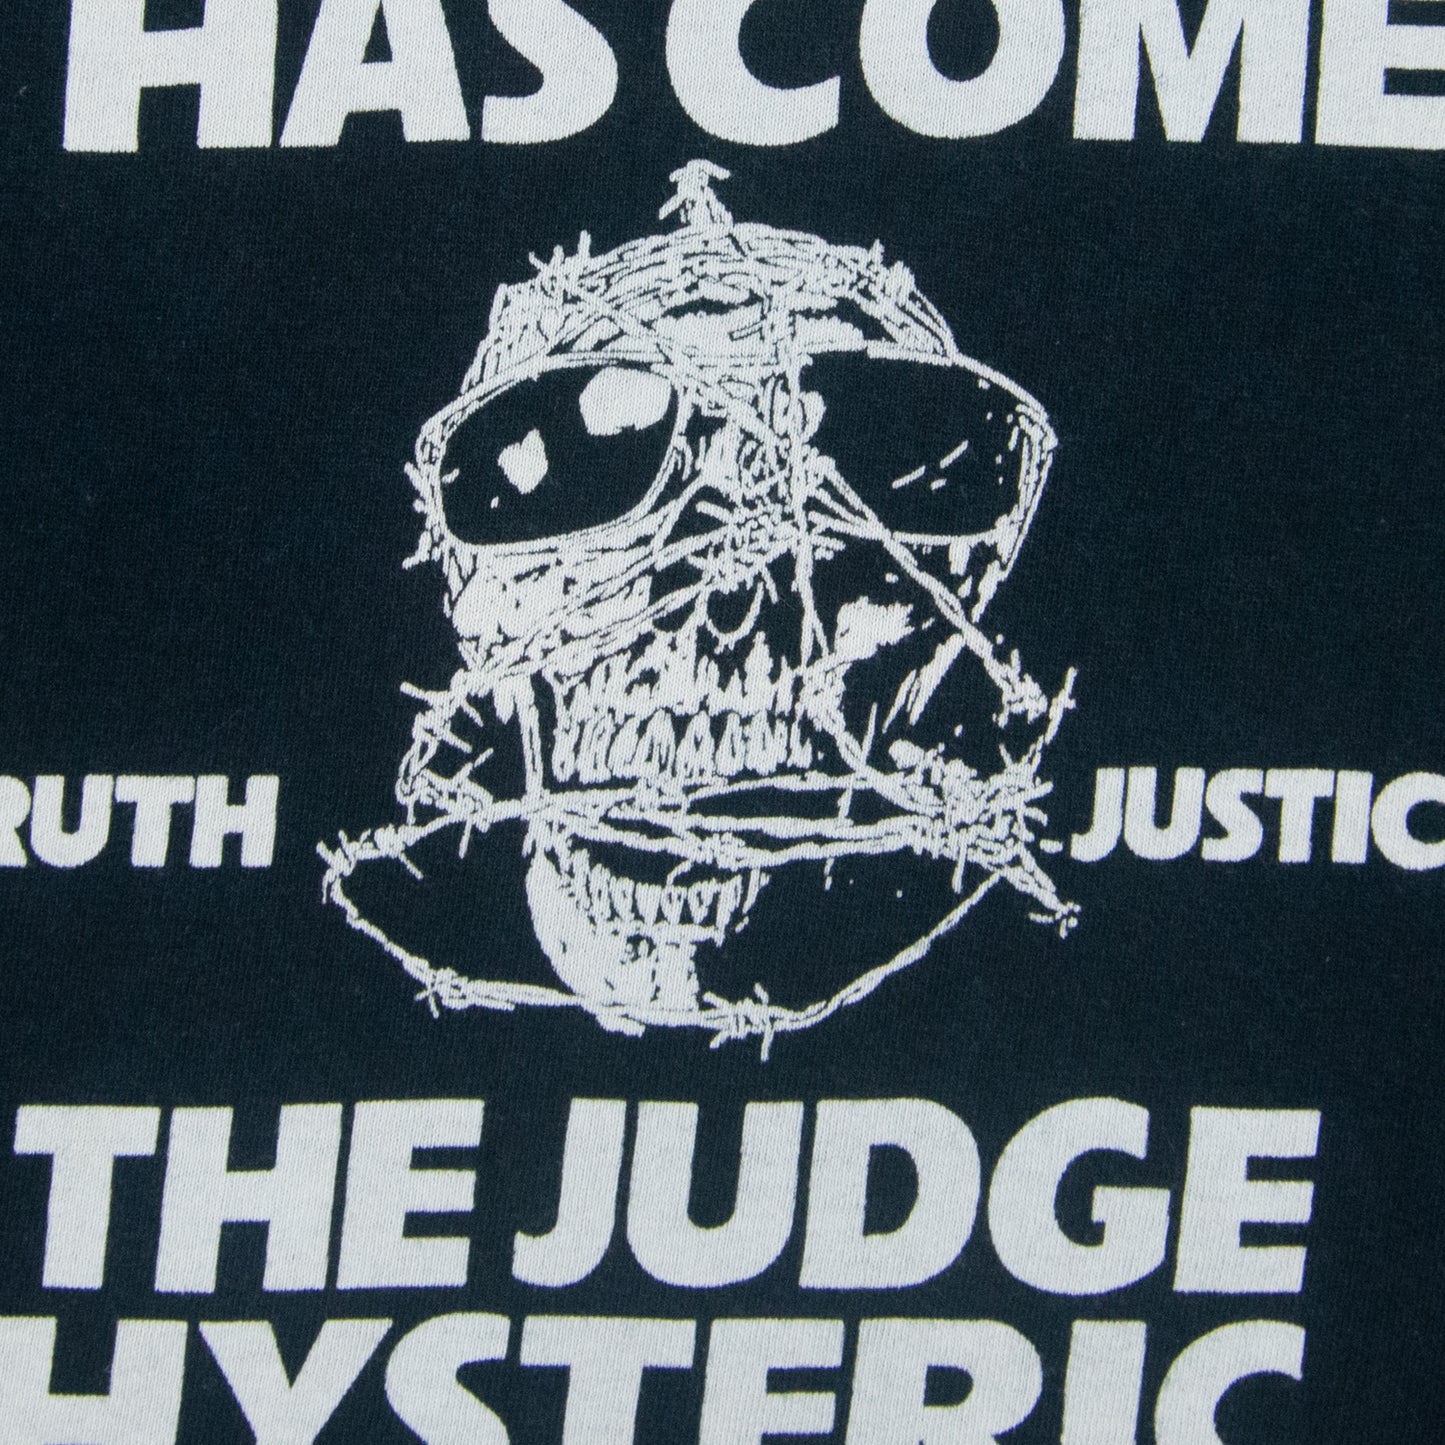 Hysteric Glamour Judgement Day Tee